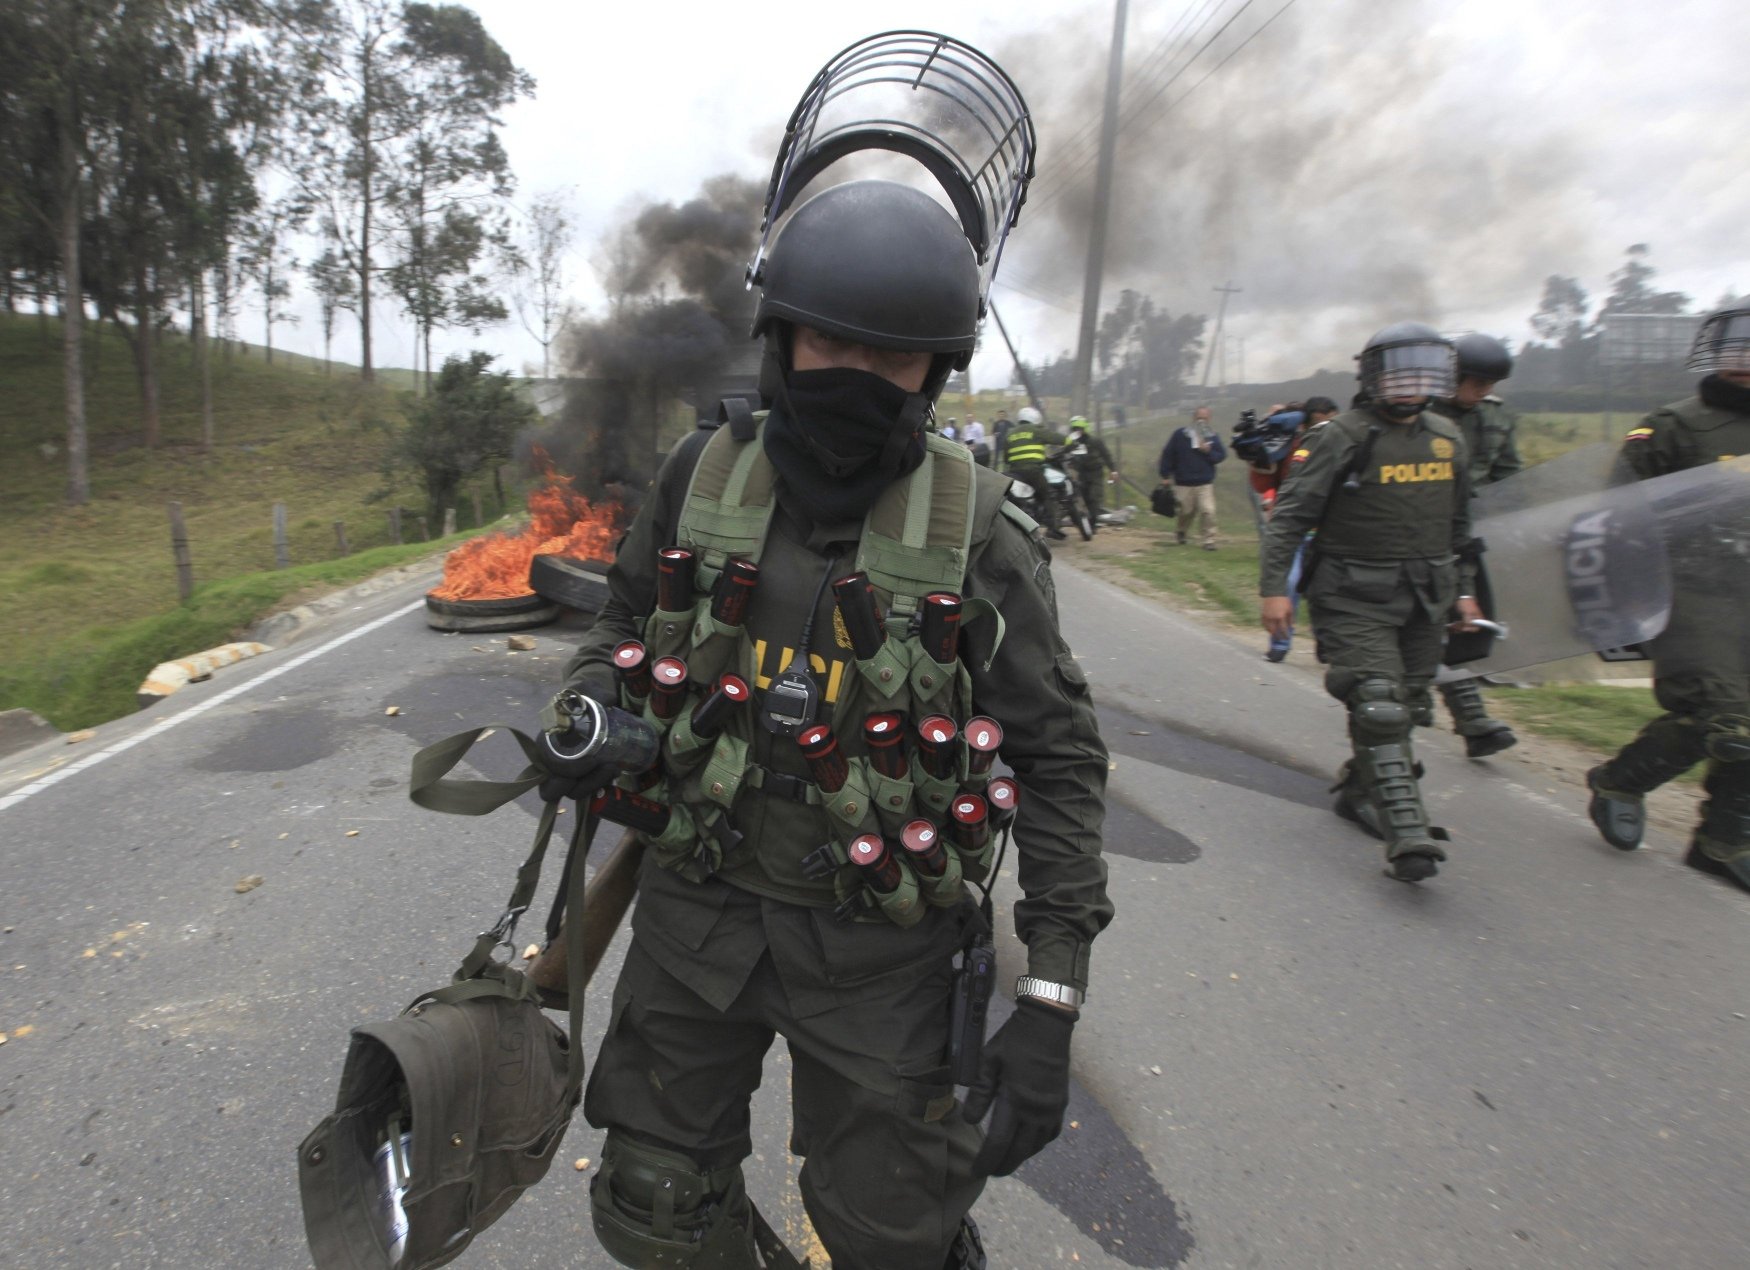 Colombian troops after clashes with ELN rebels in La Calera, near Bogota. Colombia's government says it is ready to negotiate with the rebels. Photo: AFP